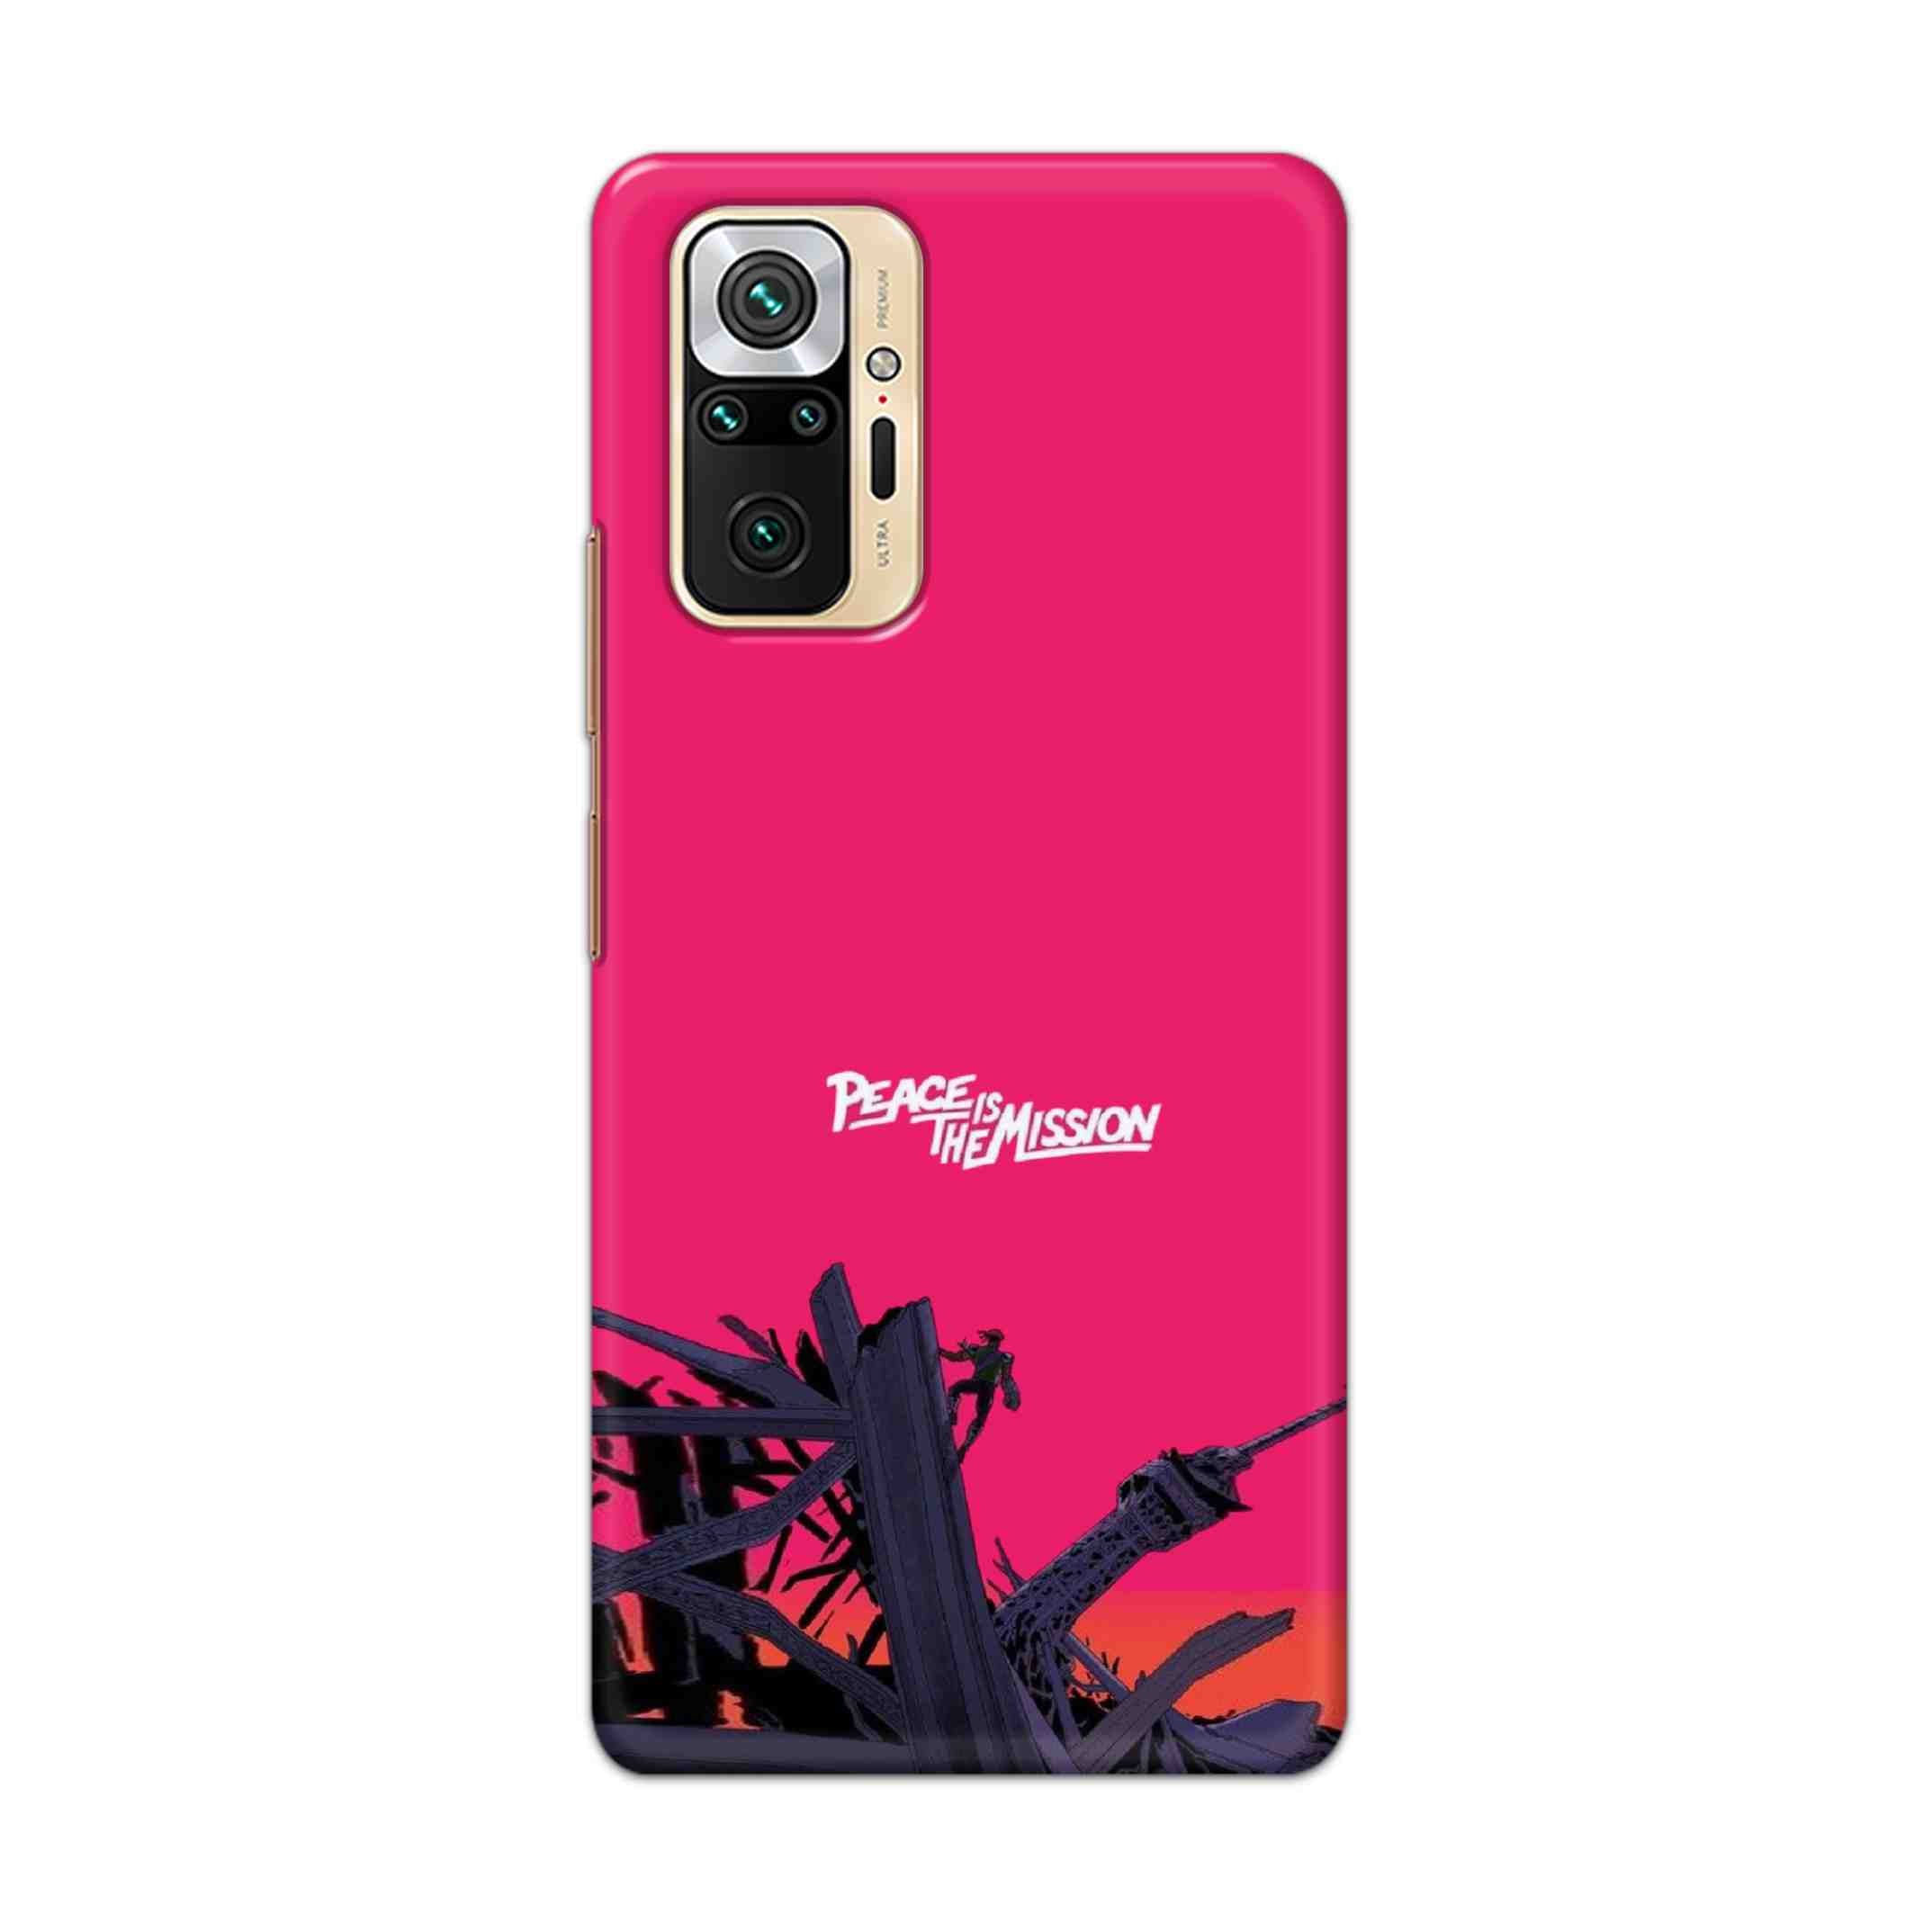 Buy Peace Is The Mission Hard Back Mobile Phone Case Cover For Redmi Note 10 Pro Online